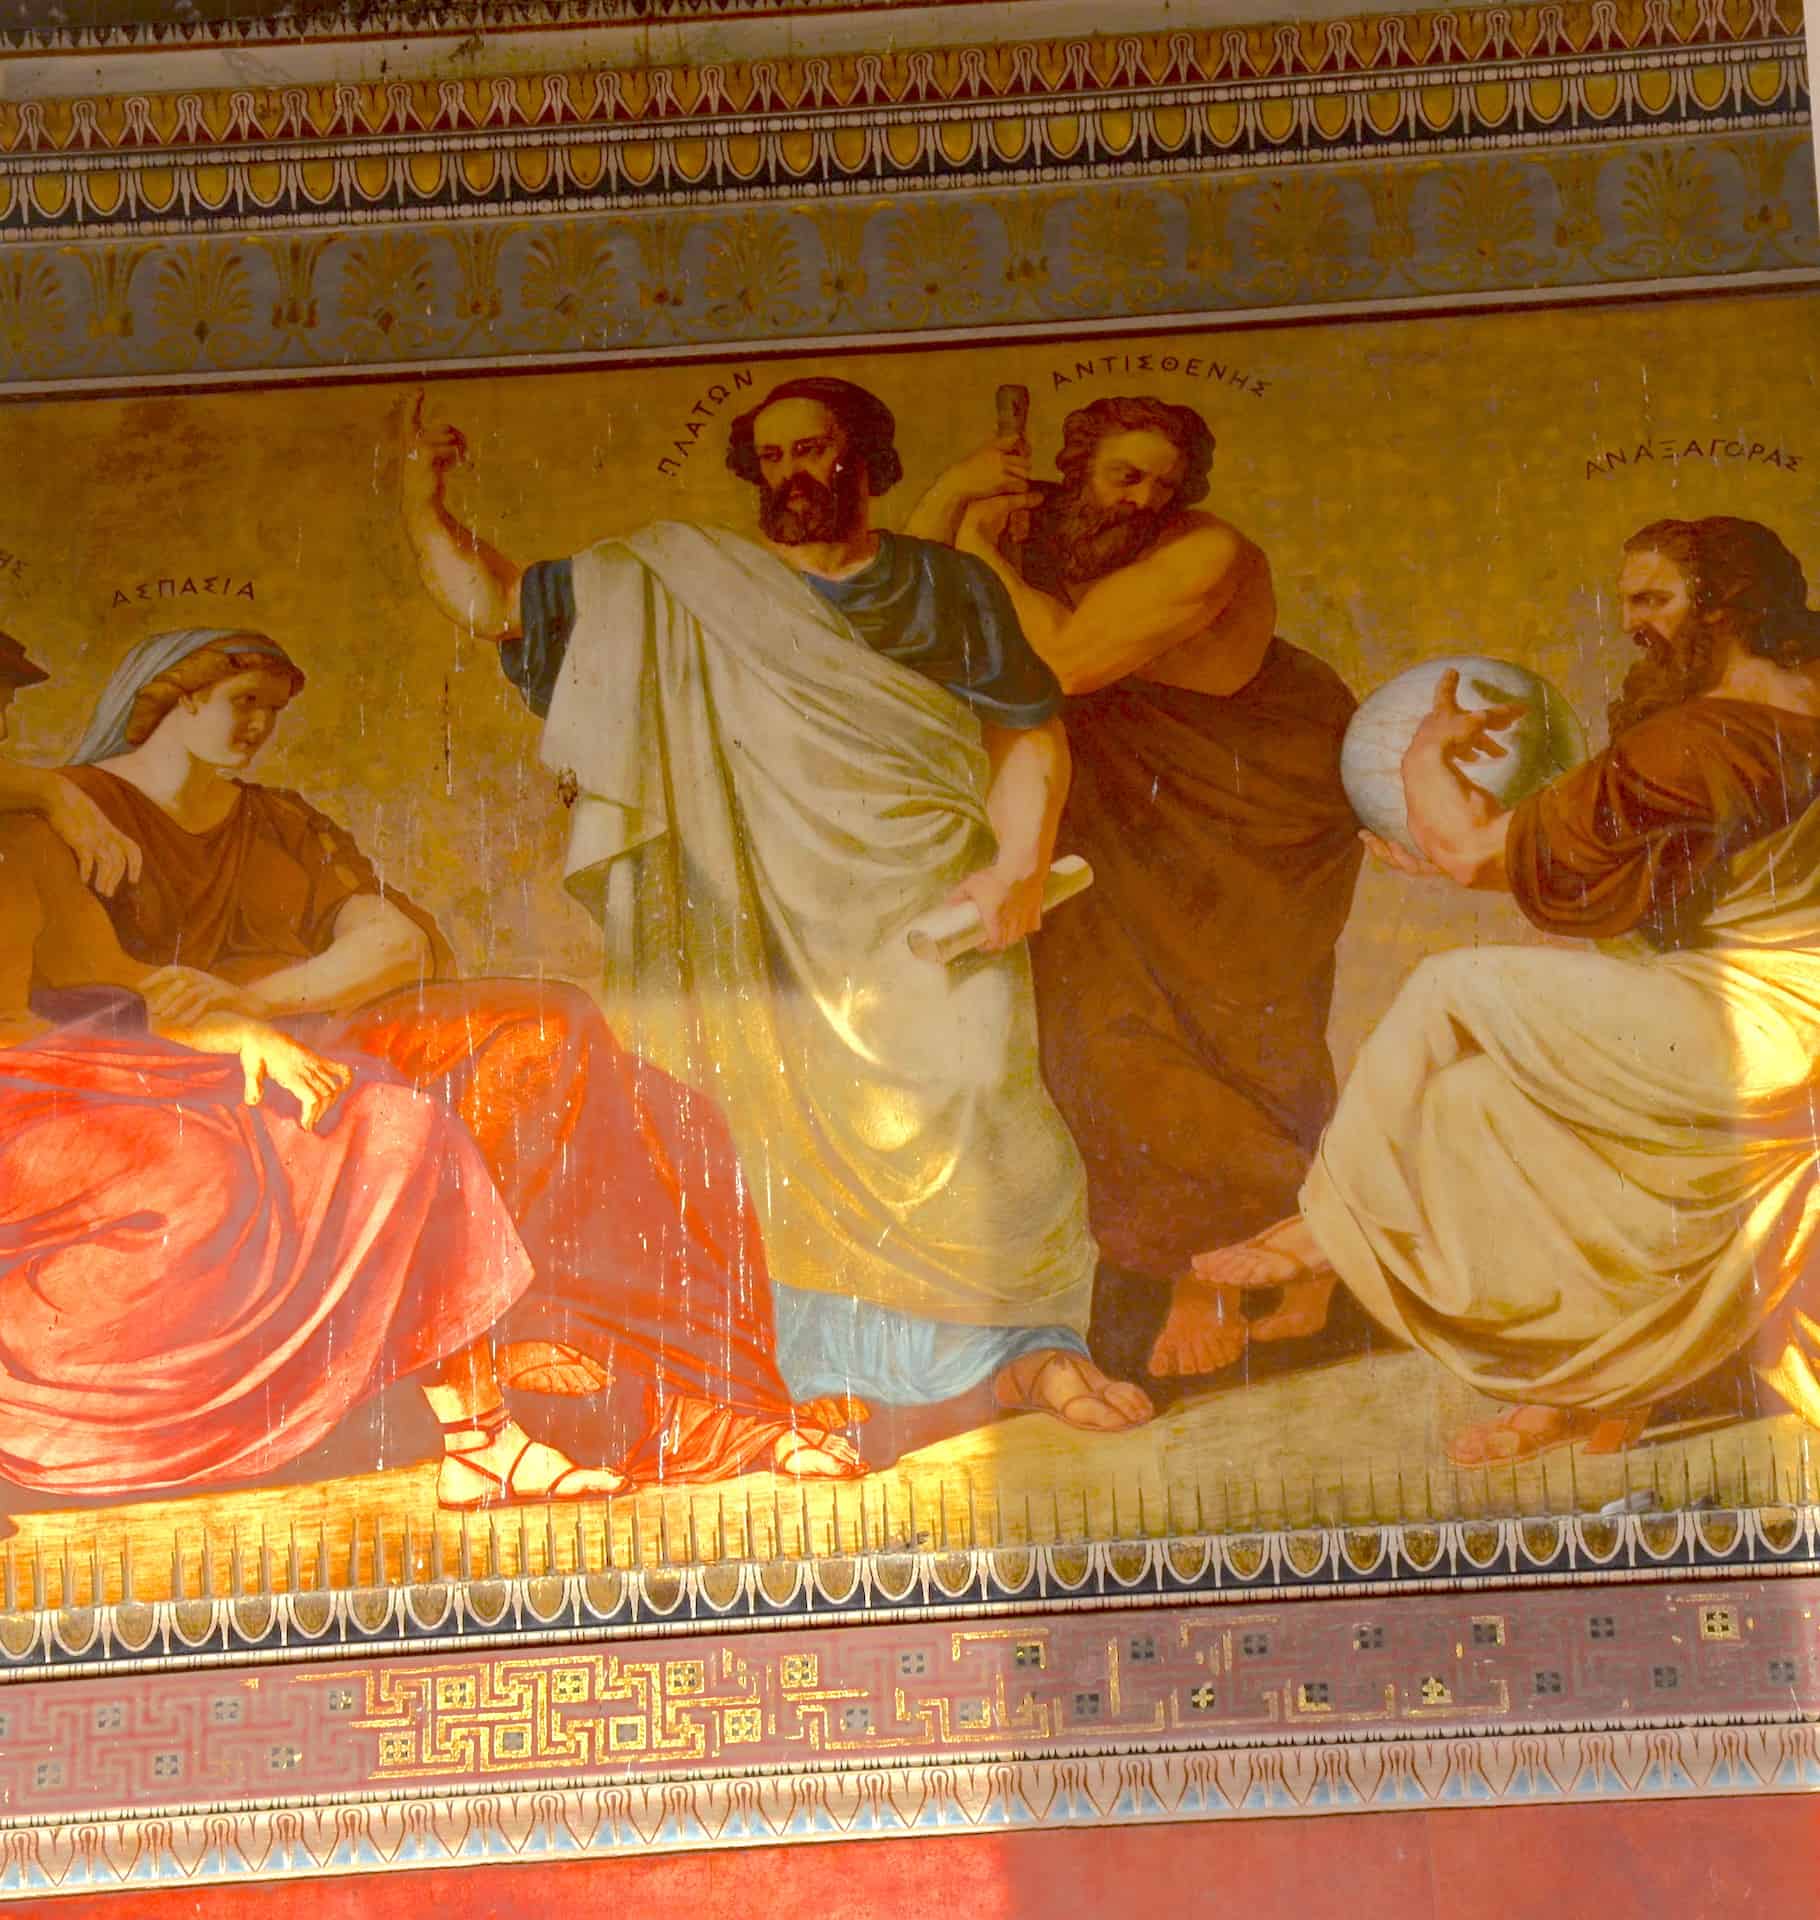 Aspasia (left), Plato (left center), Antisthenes (right center), and Anaxagoras (right) by Carl Rahl at the University of Athens